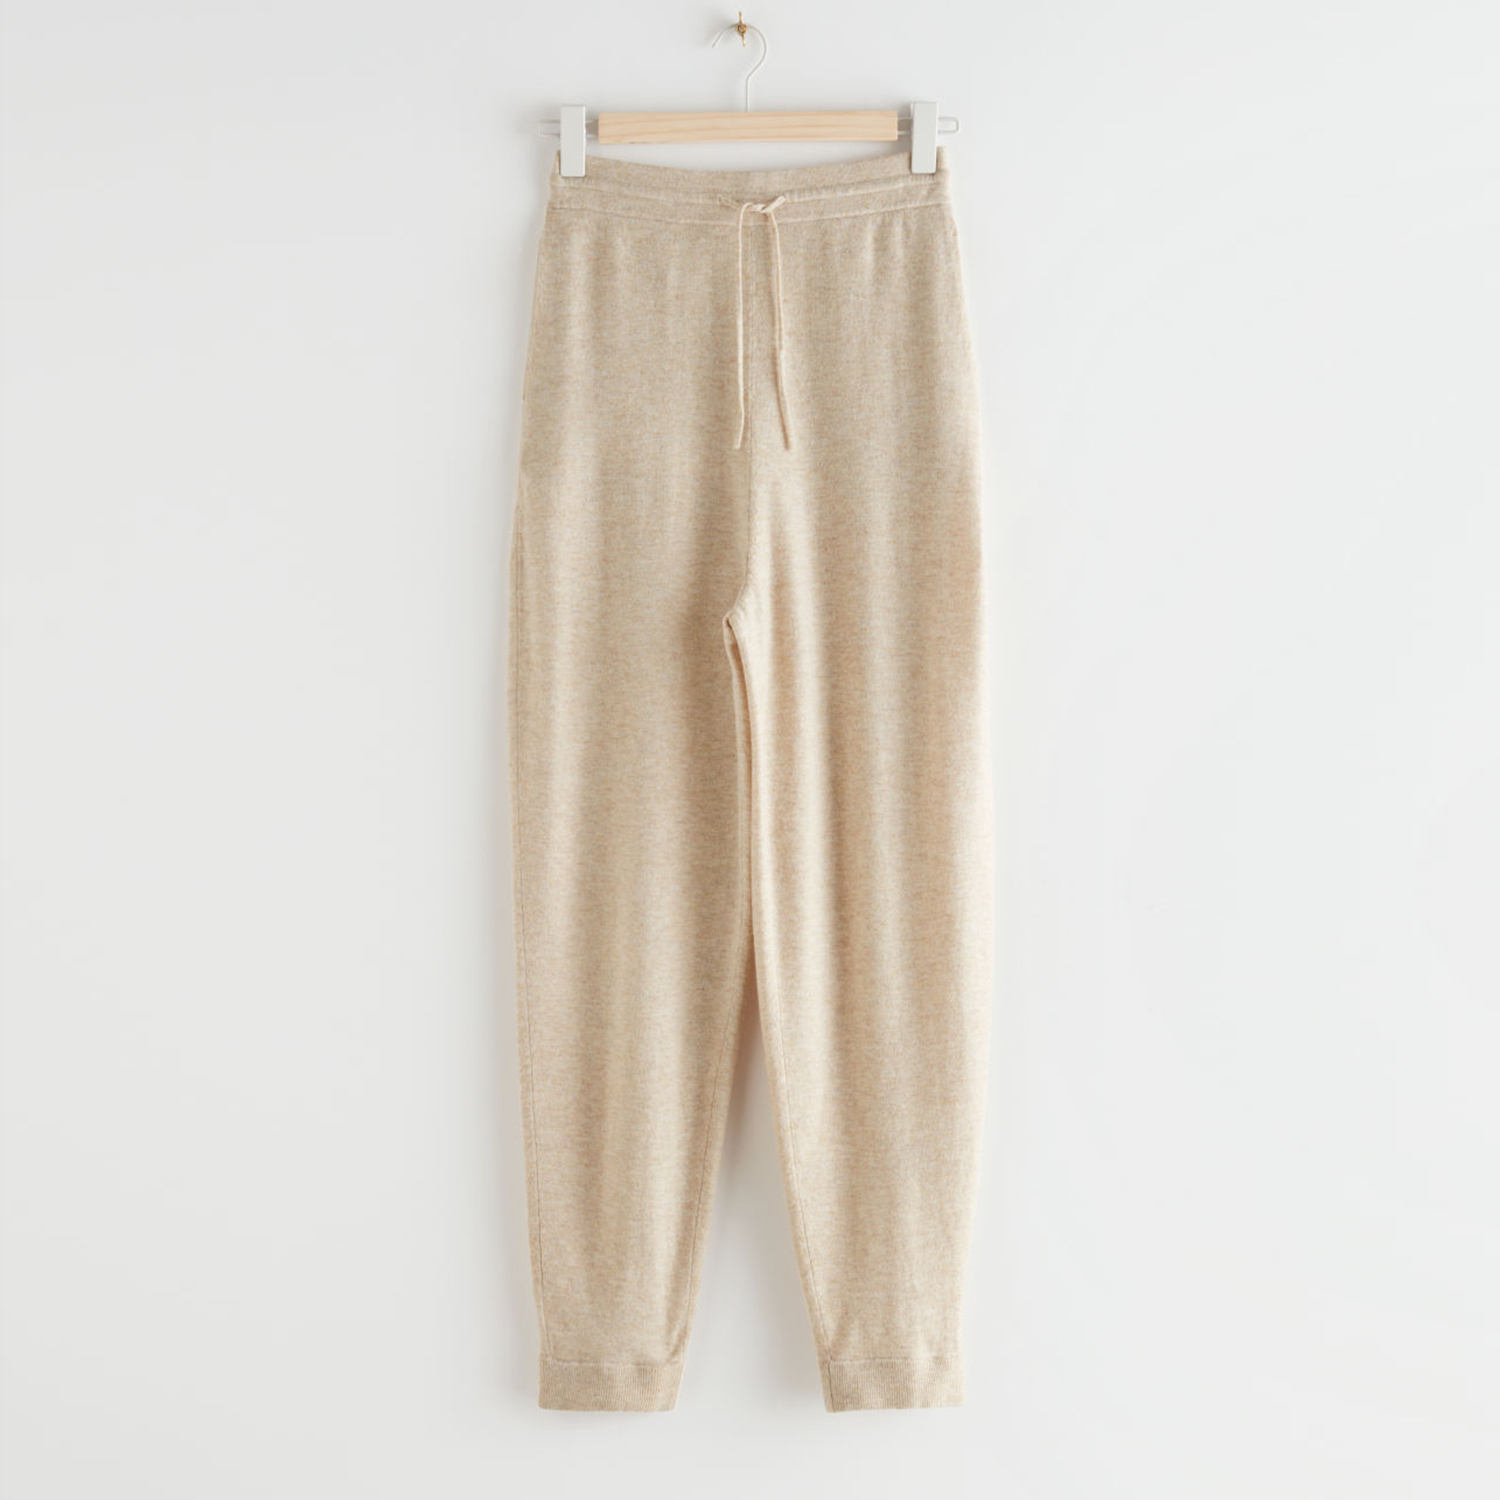 & Other Stories Oversized Wool Knit Drawstring Trousers